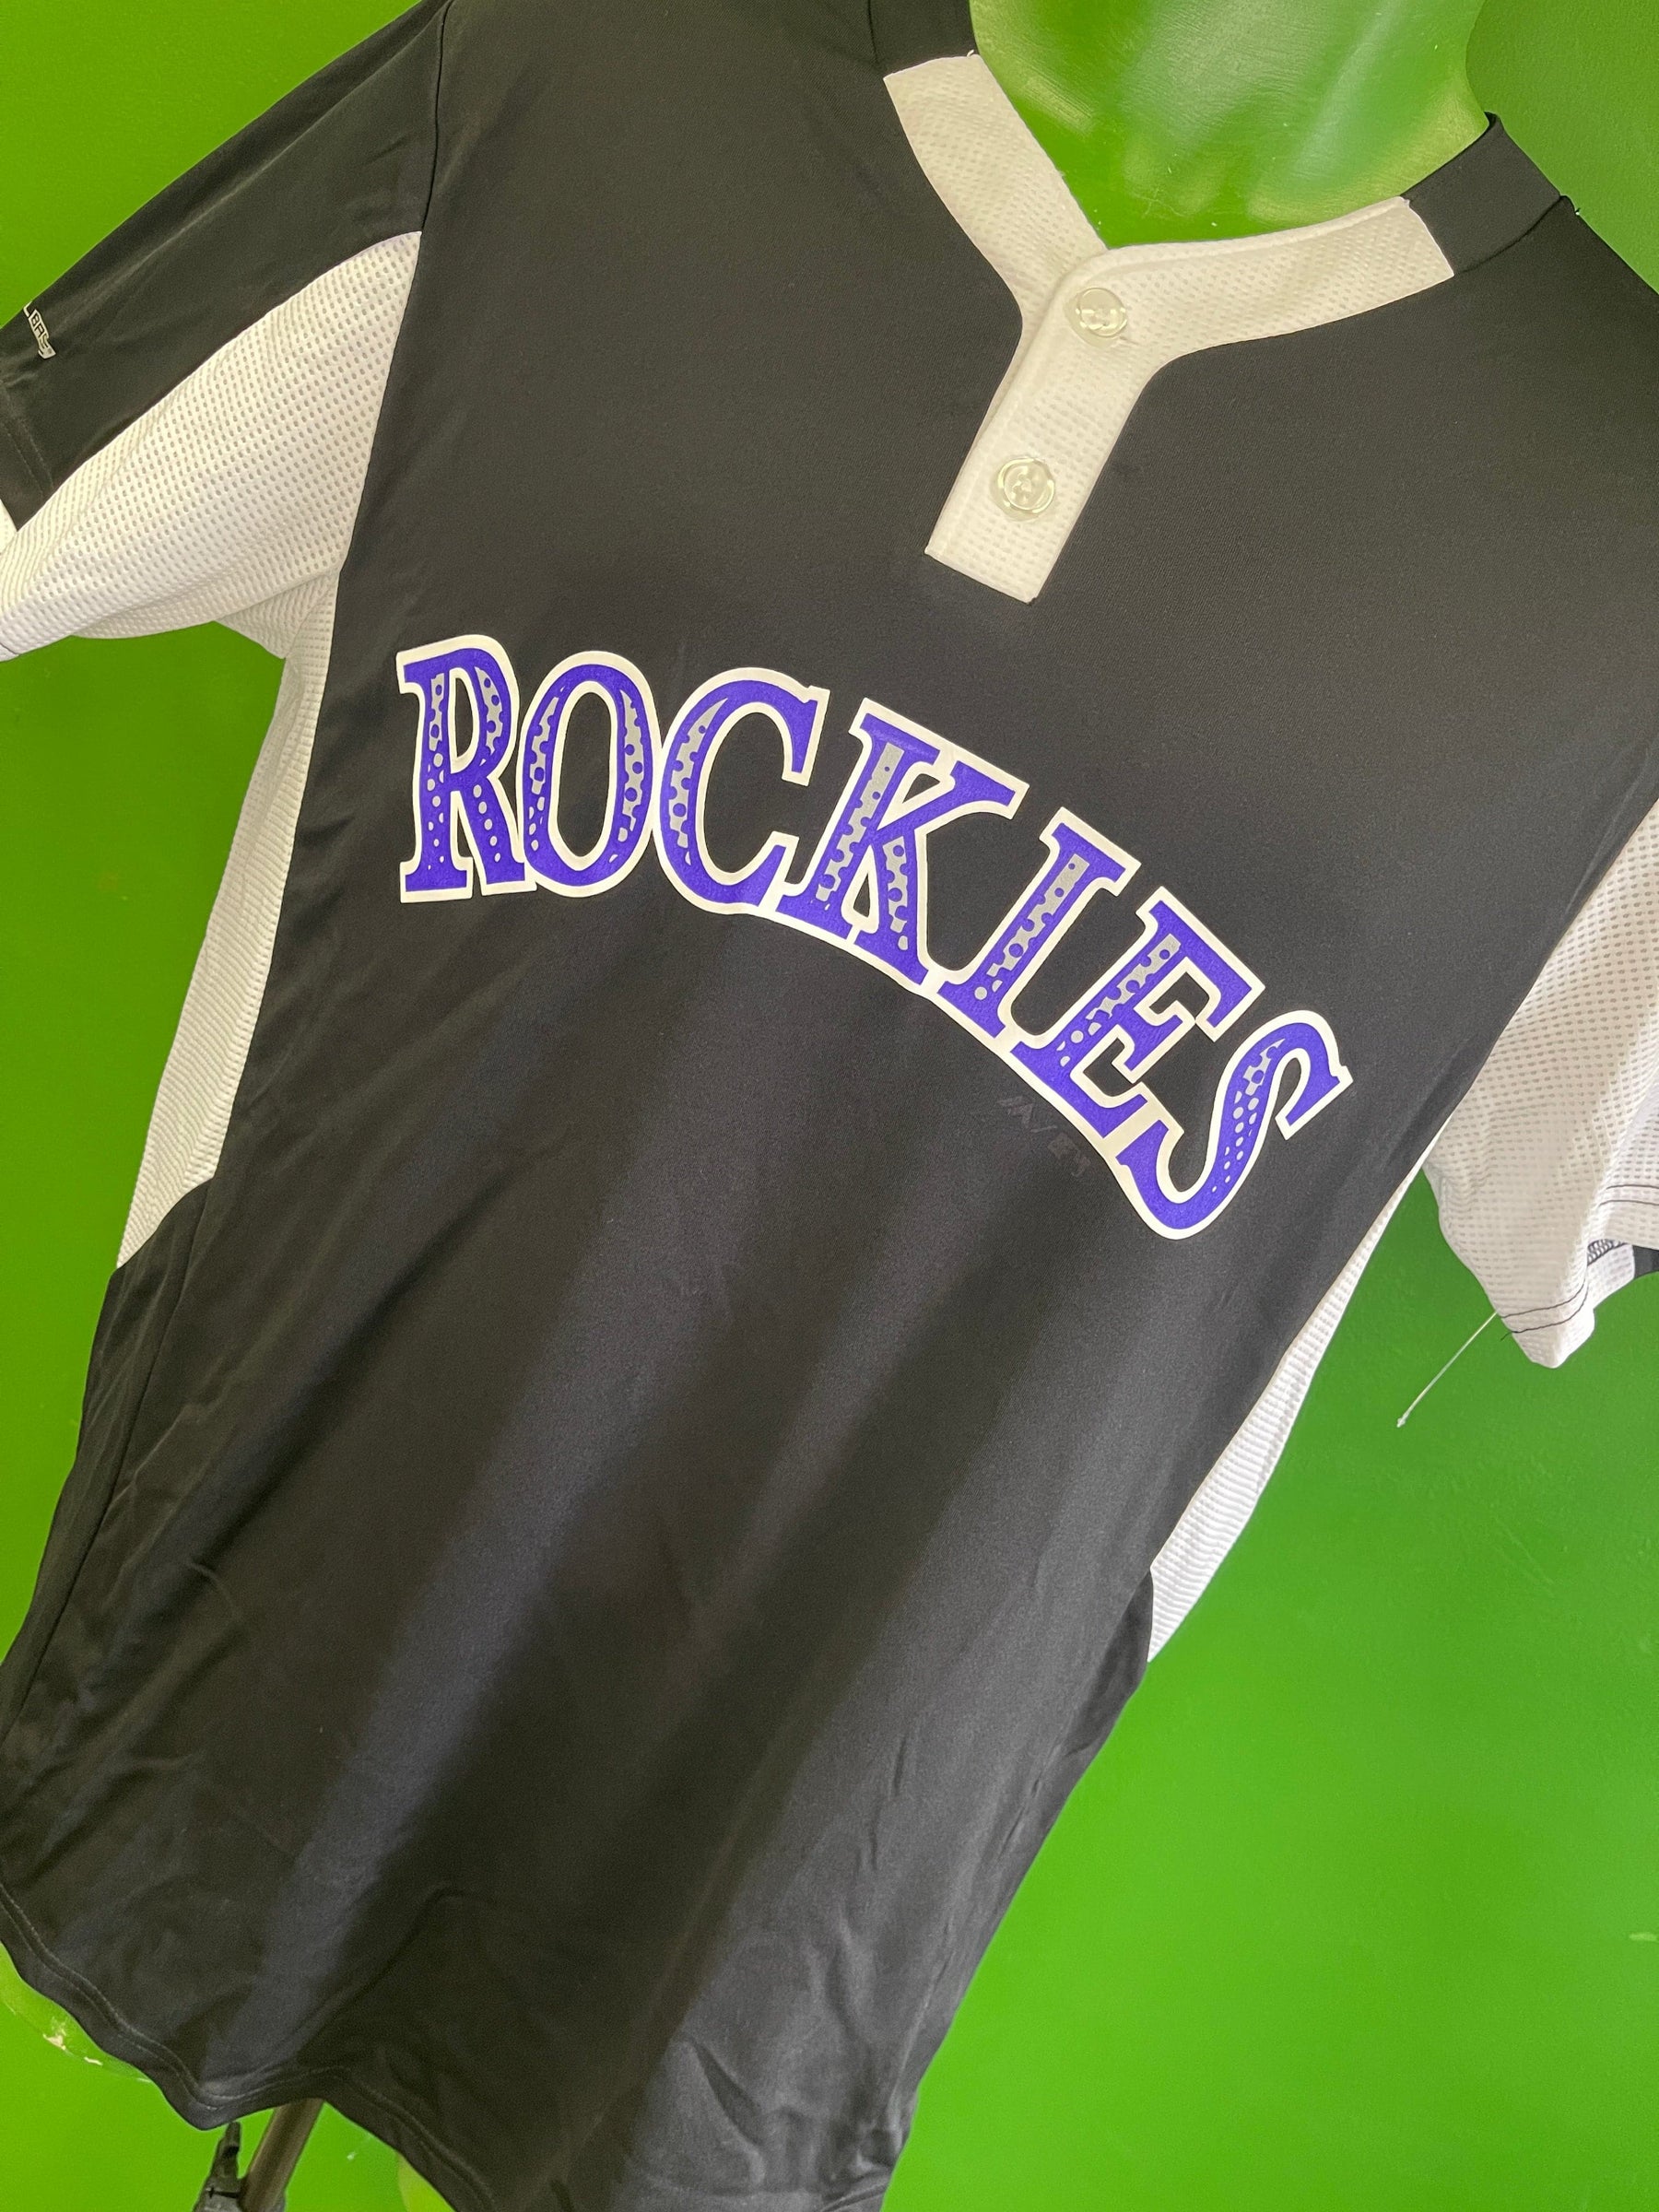 MLB Colorado Rockies Majestic Buttoned Baseball Top Men's Small NWOT